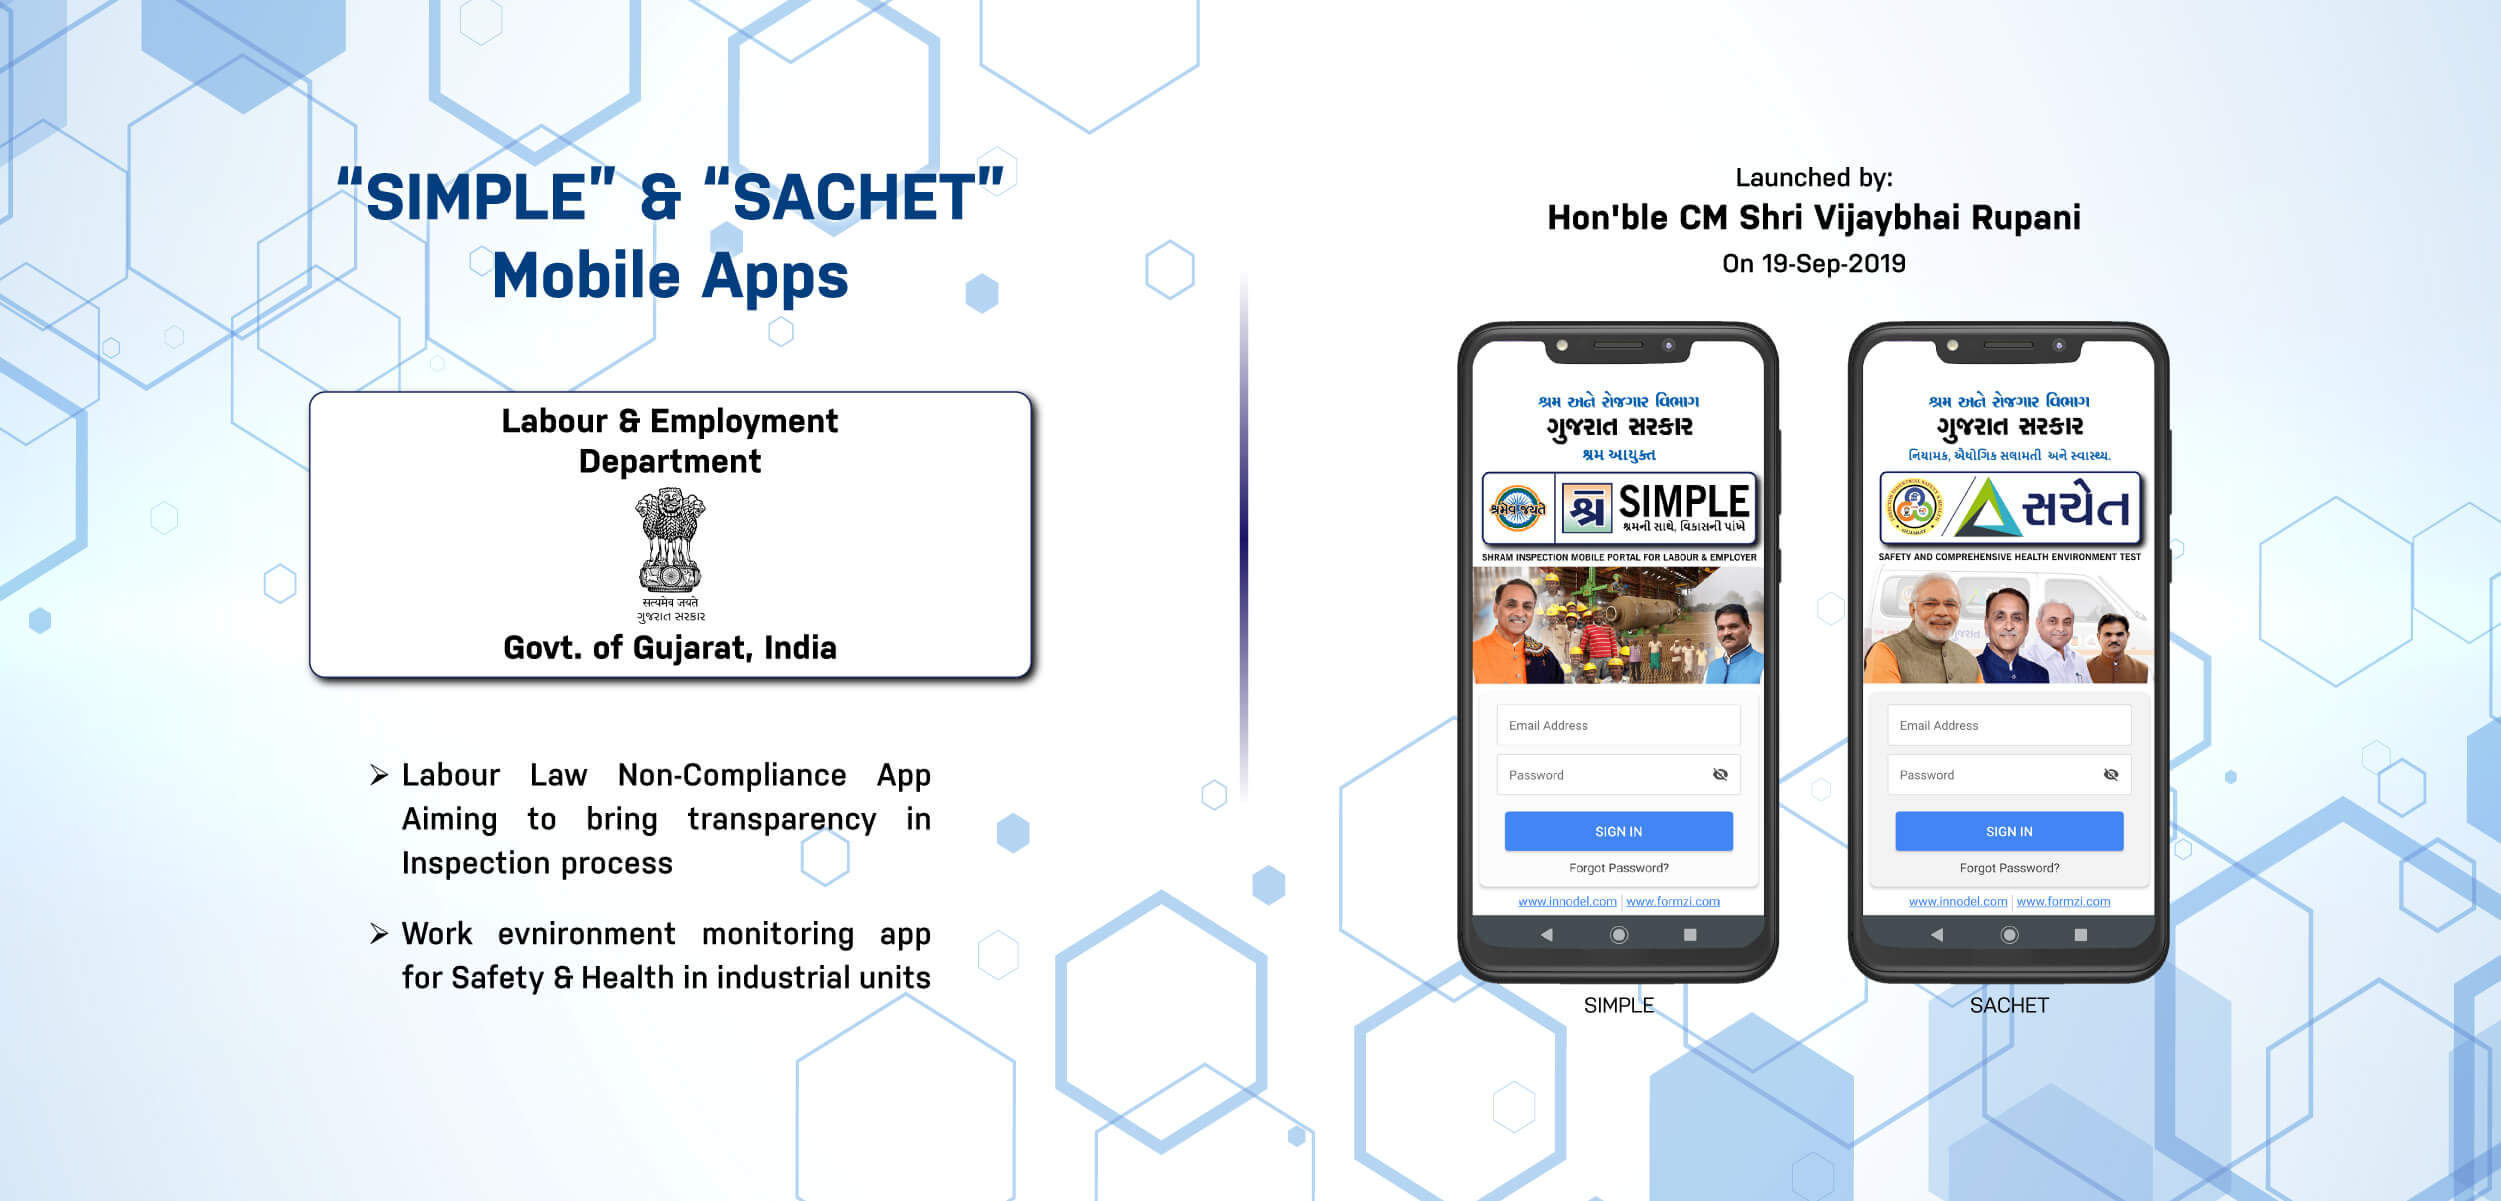 SIMPLe and SACHET Mobile Application for Government of Gujarat